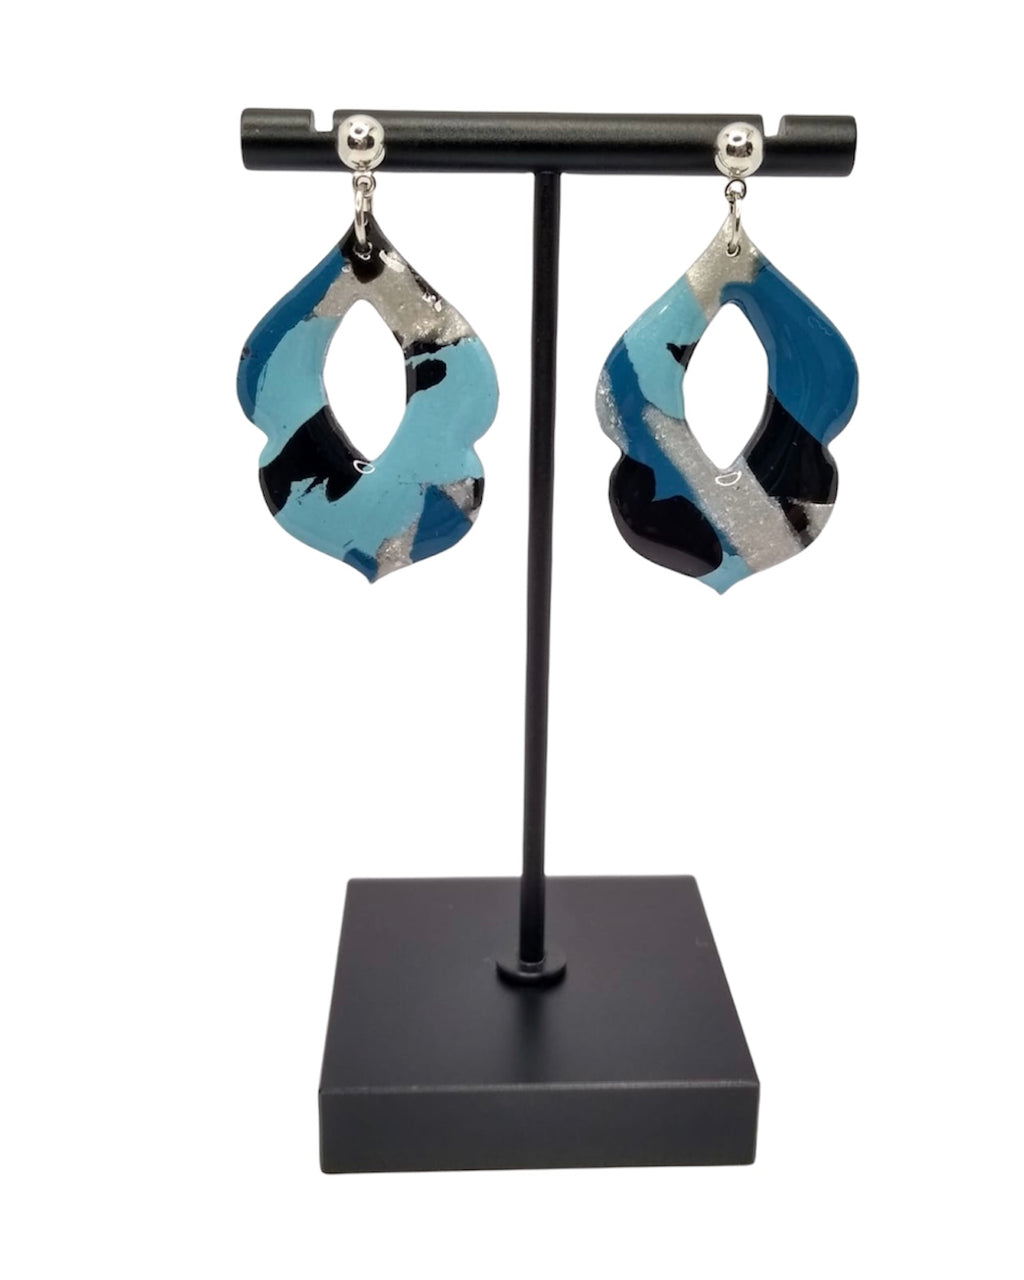 The Astrid in Blue Handmade Earrings - ADSO Creations